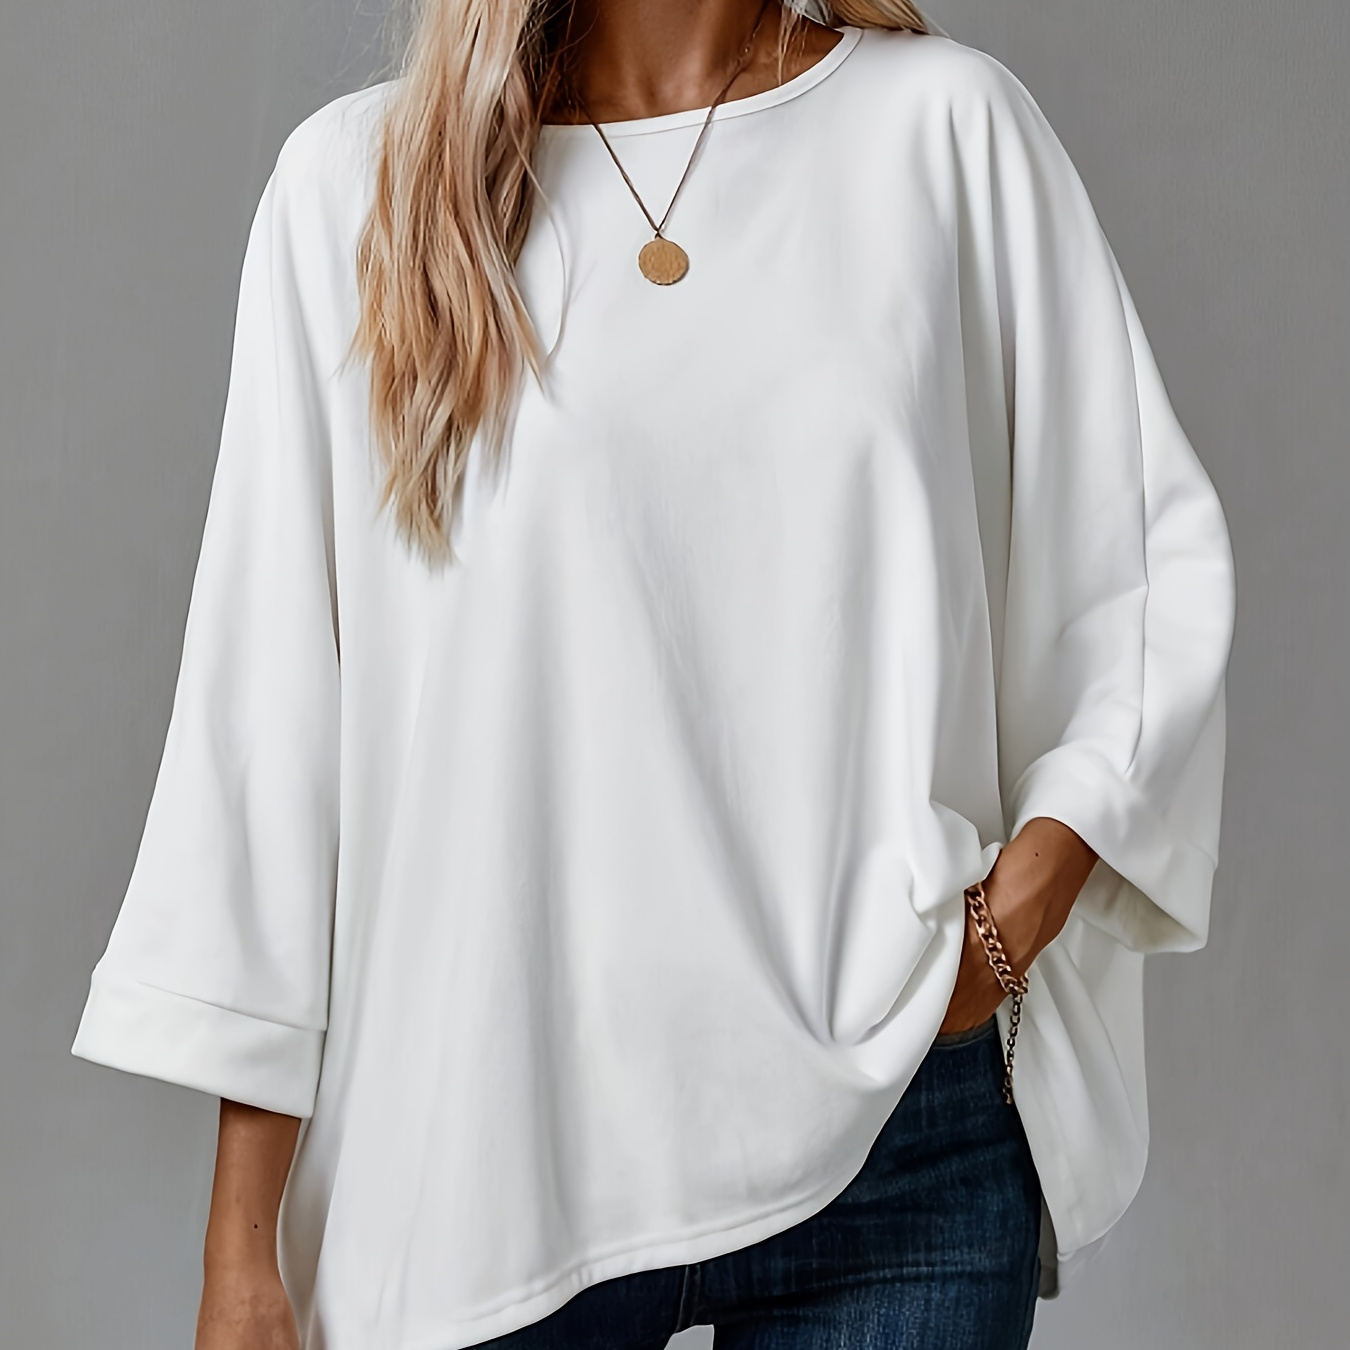 

Solid Color Crew Neck T-shirt, Casual Batwing Sleeve Oversized T-shirt, Women's Clothing